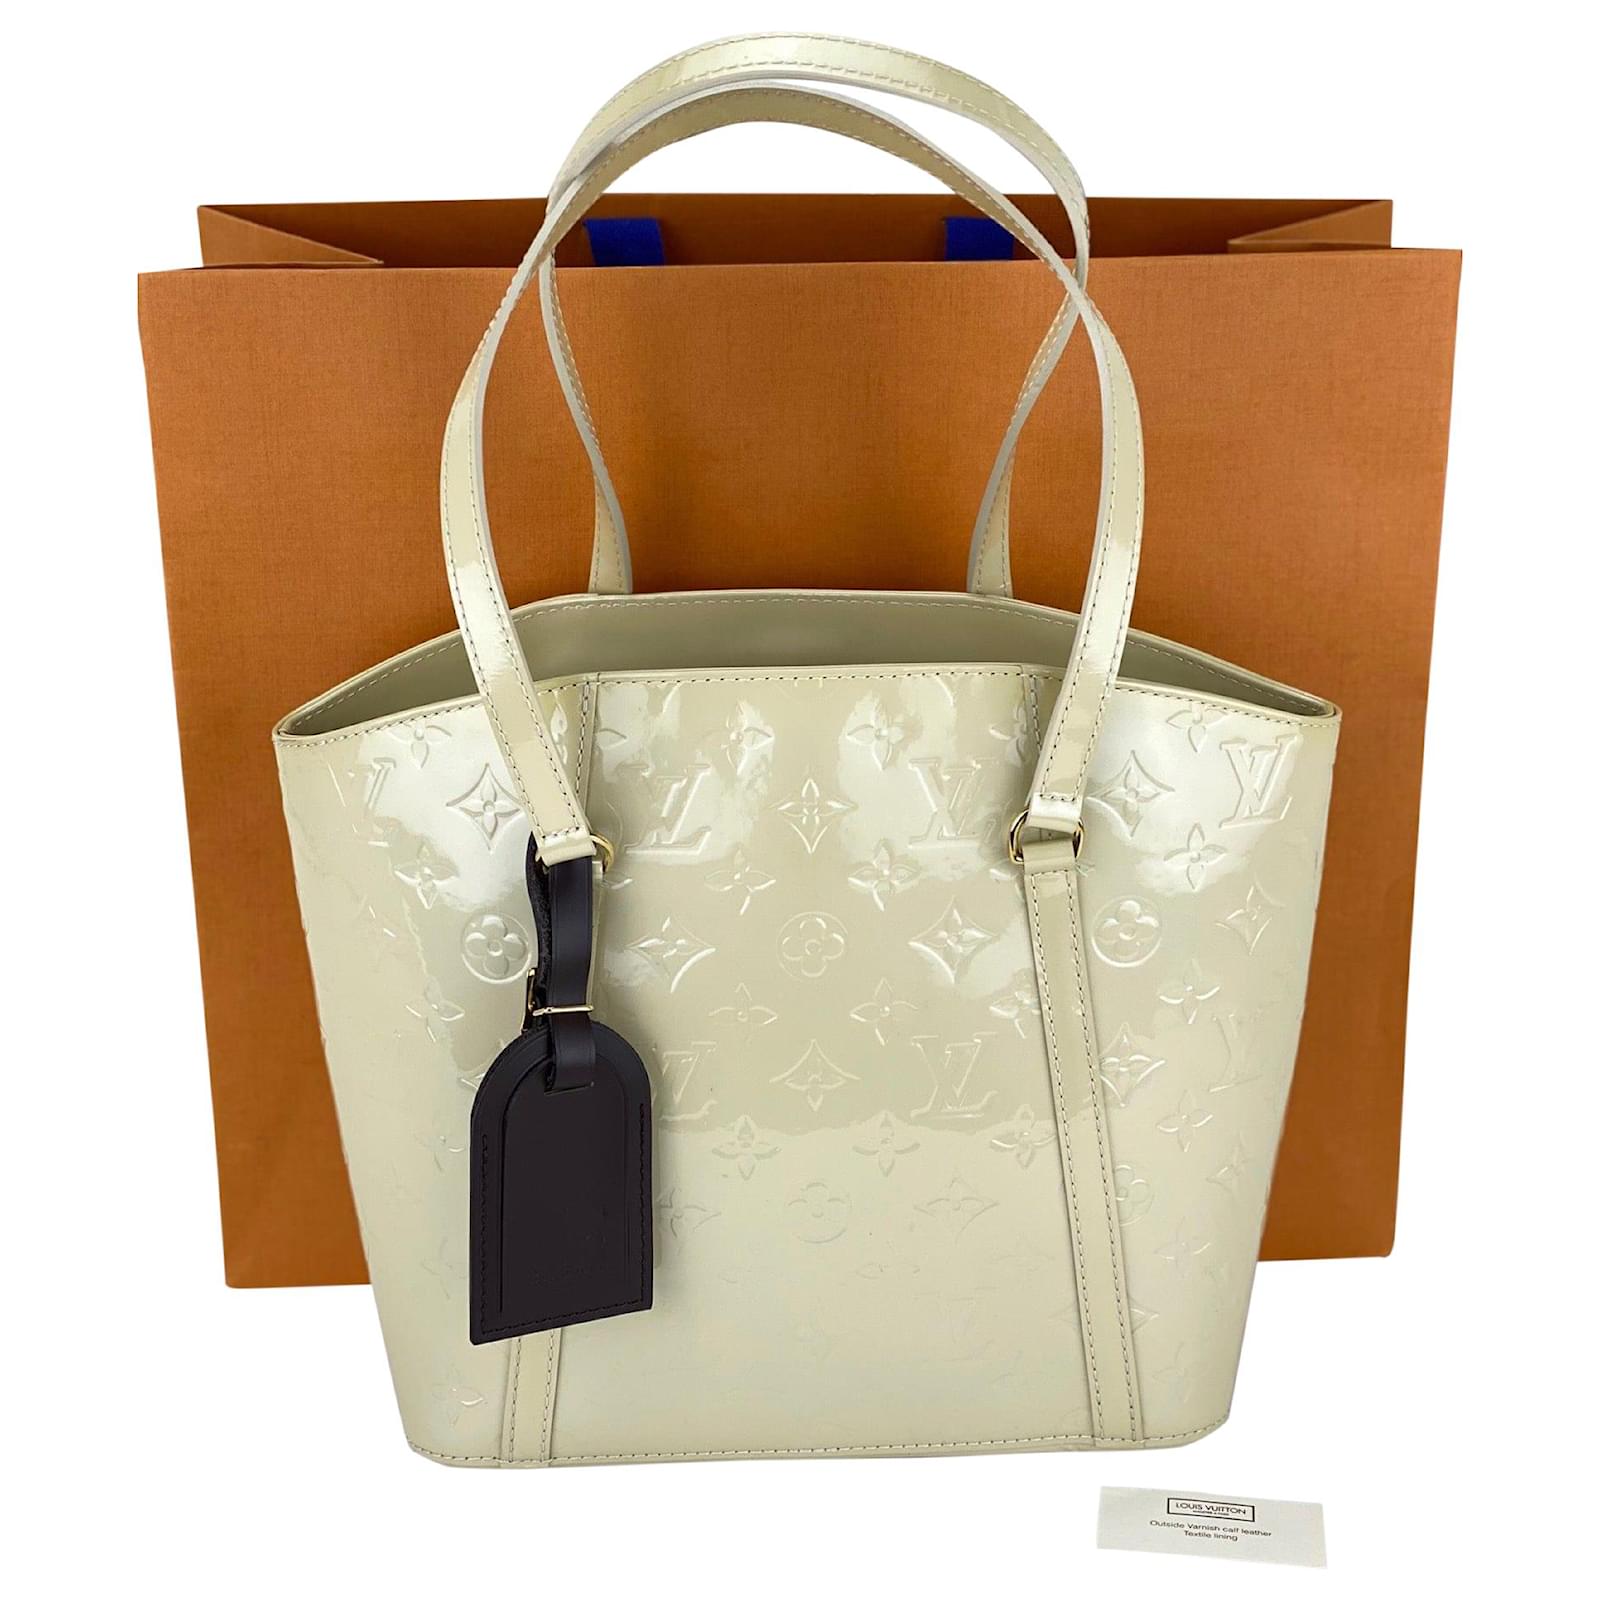 Louis Vuitton White Canvas Tote Bag (Pre-Owned)